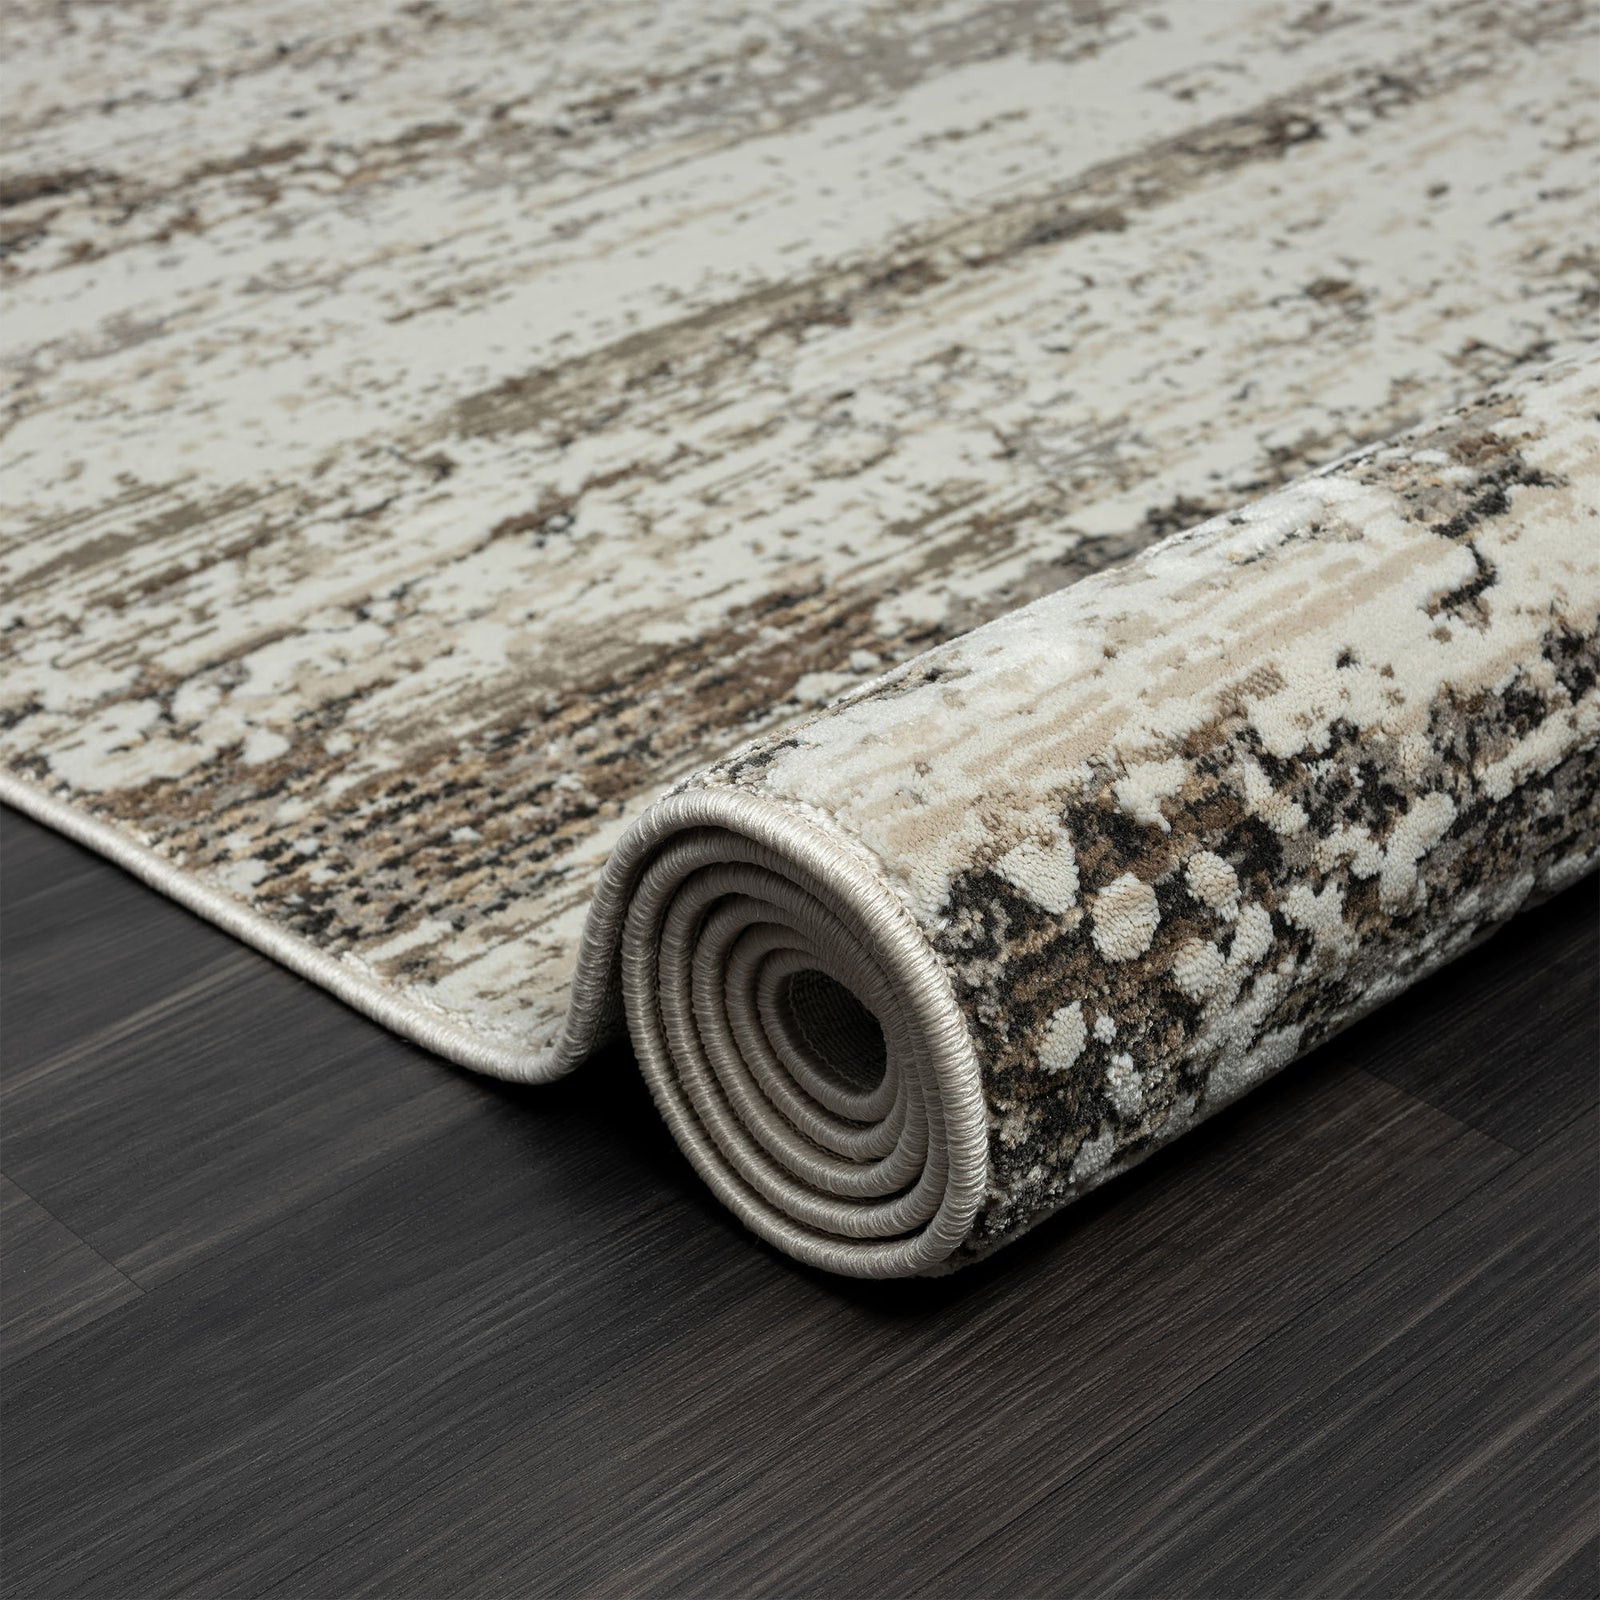 4' X 6' Beige Abstract Distressed Area Rug